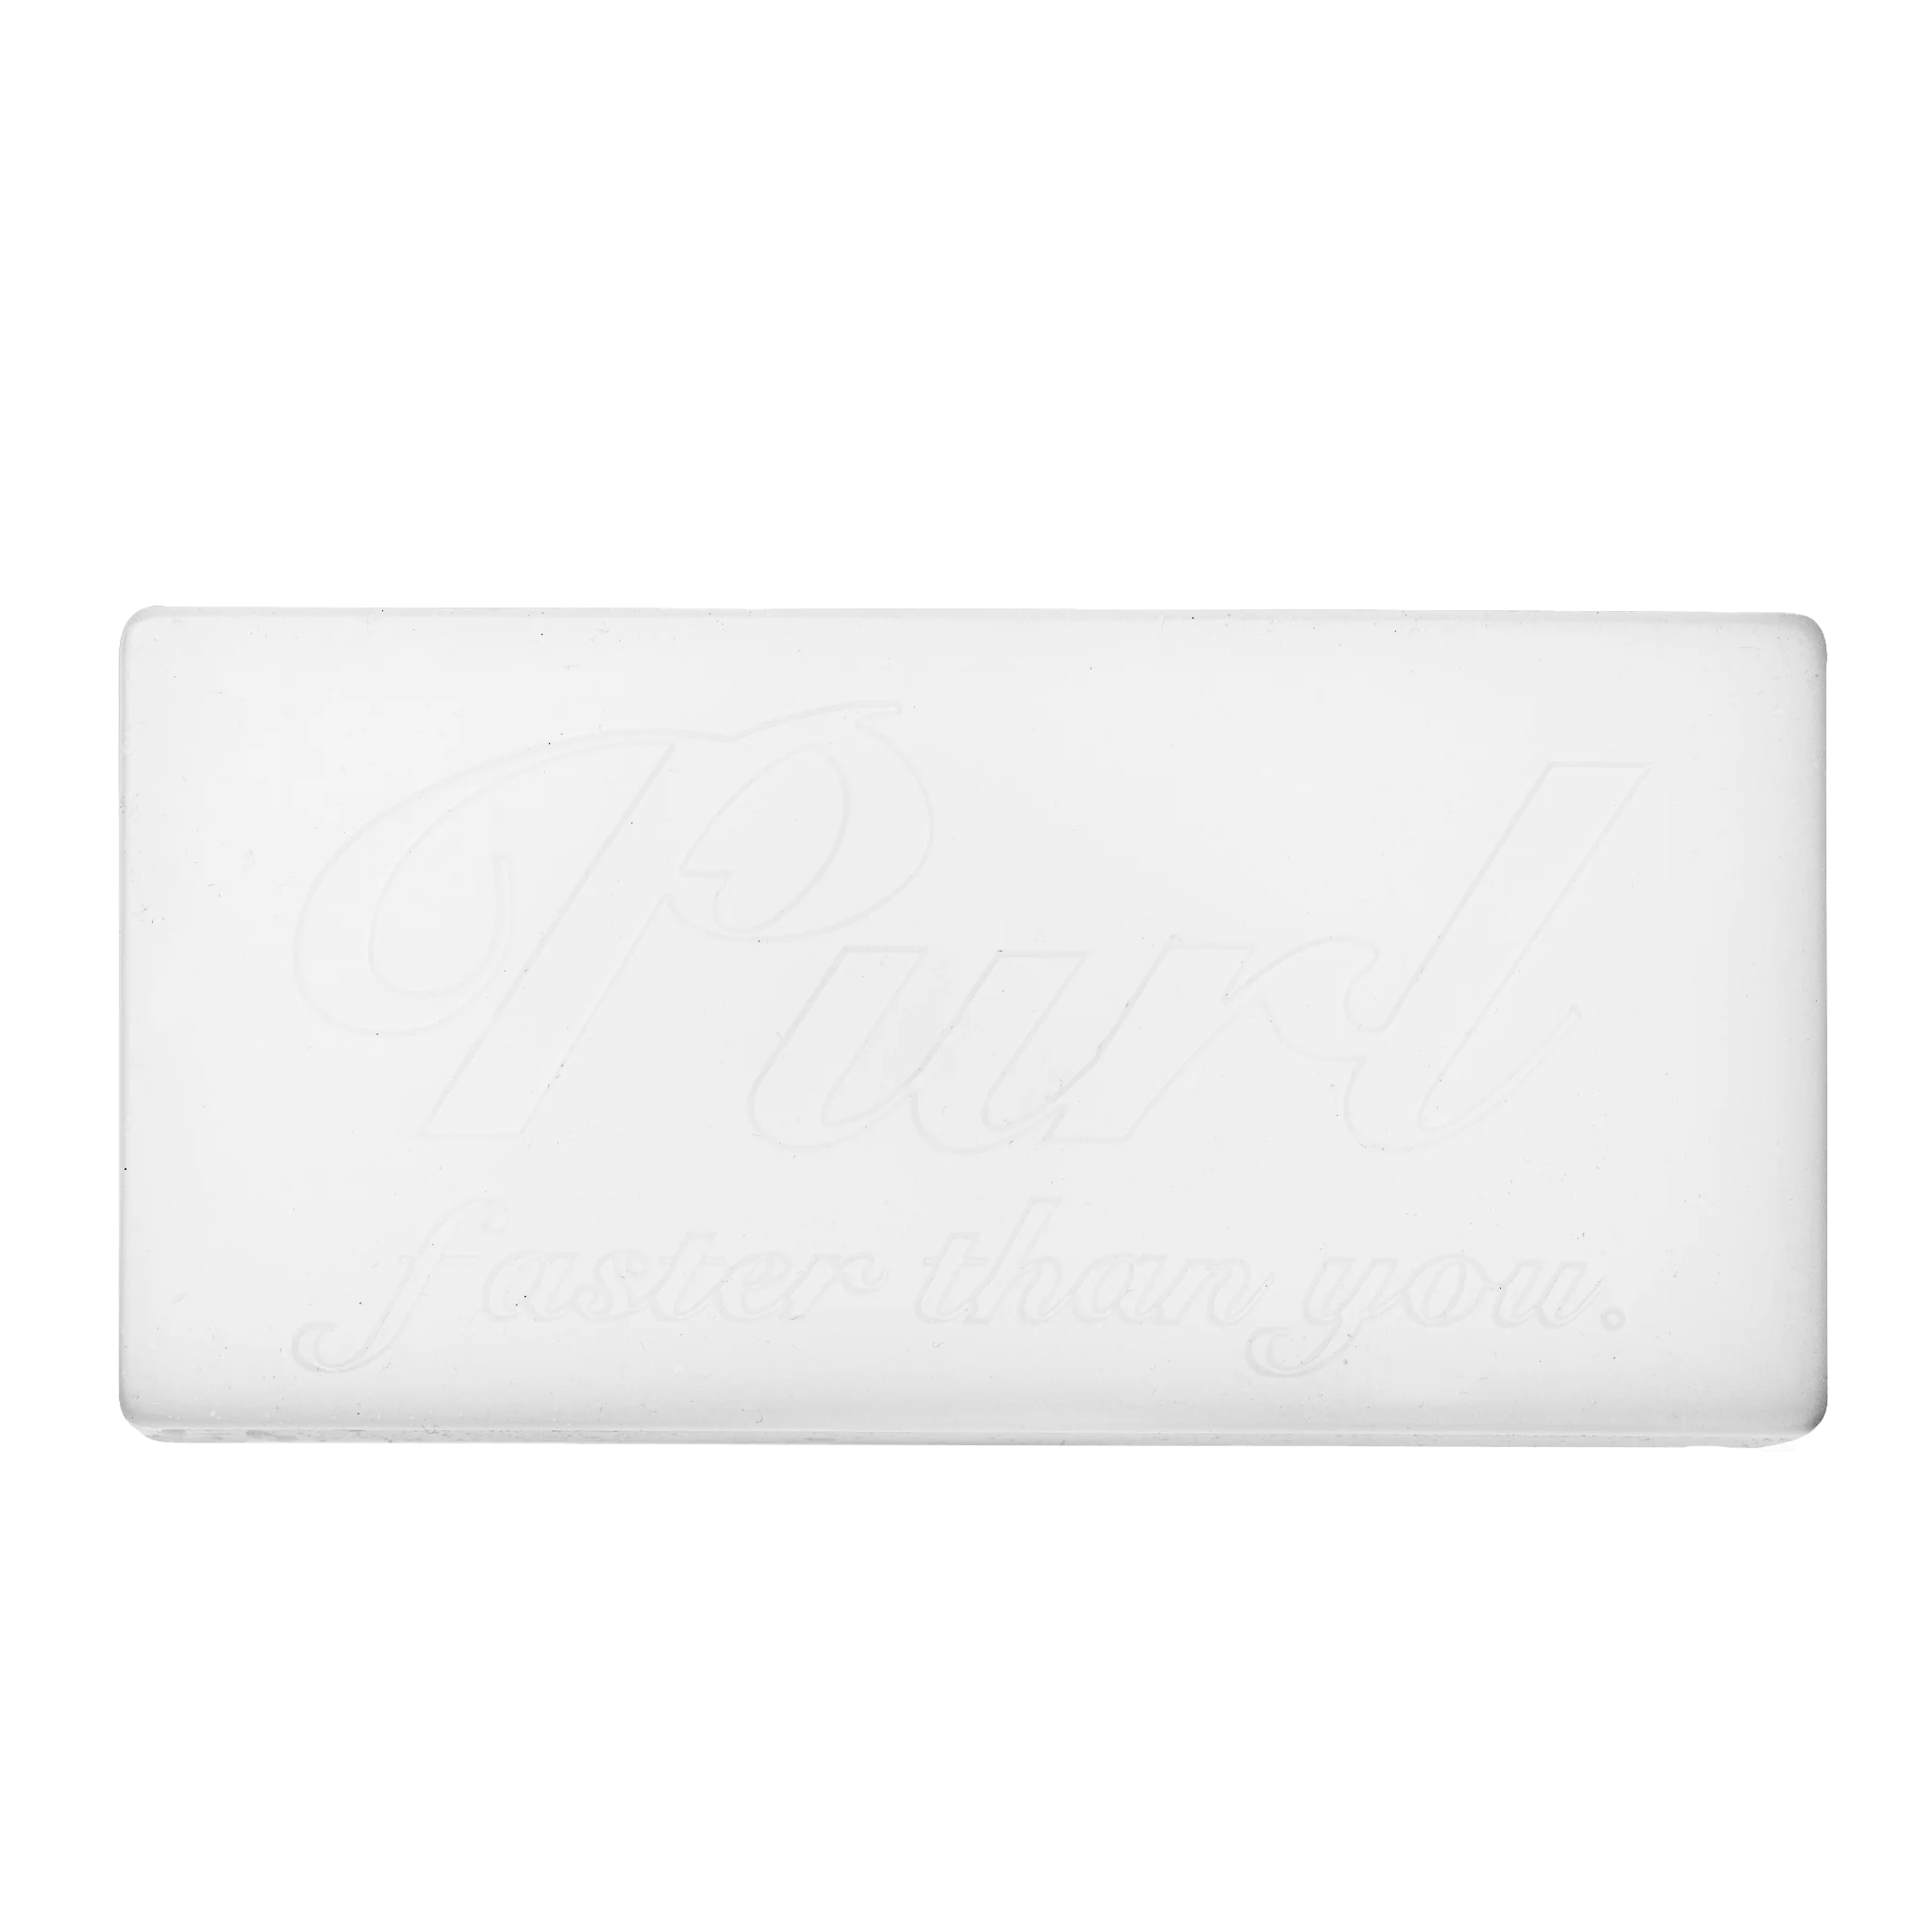 Product shot of Purl 3-in-1 Clear Ski Wax and Base Prep 1lb Brick #2